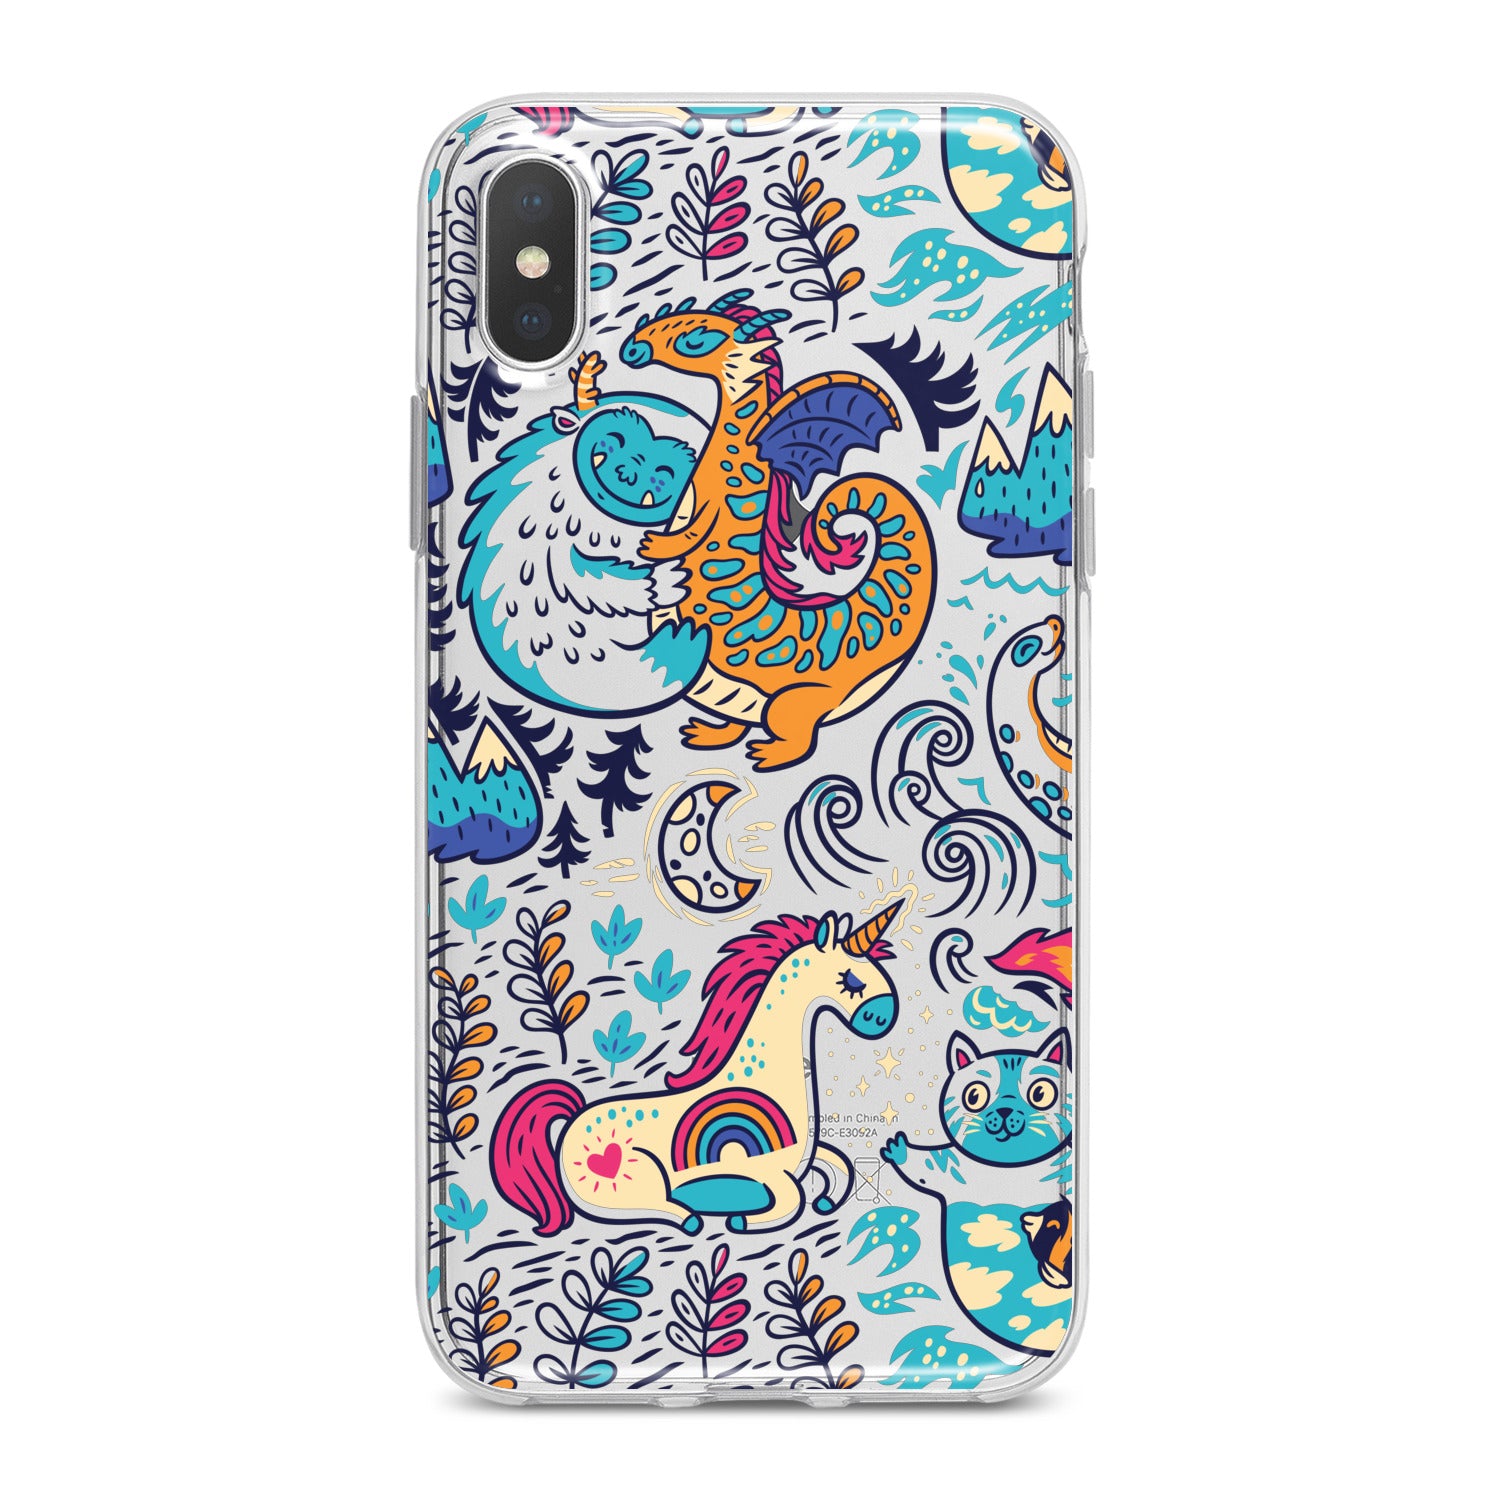 Lex Altern Magic Animals Phone Case for your iPhone & Android phone.